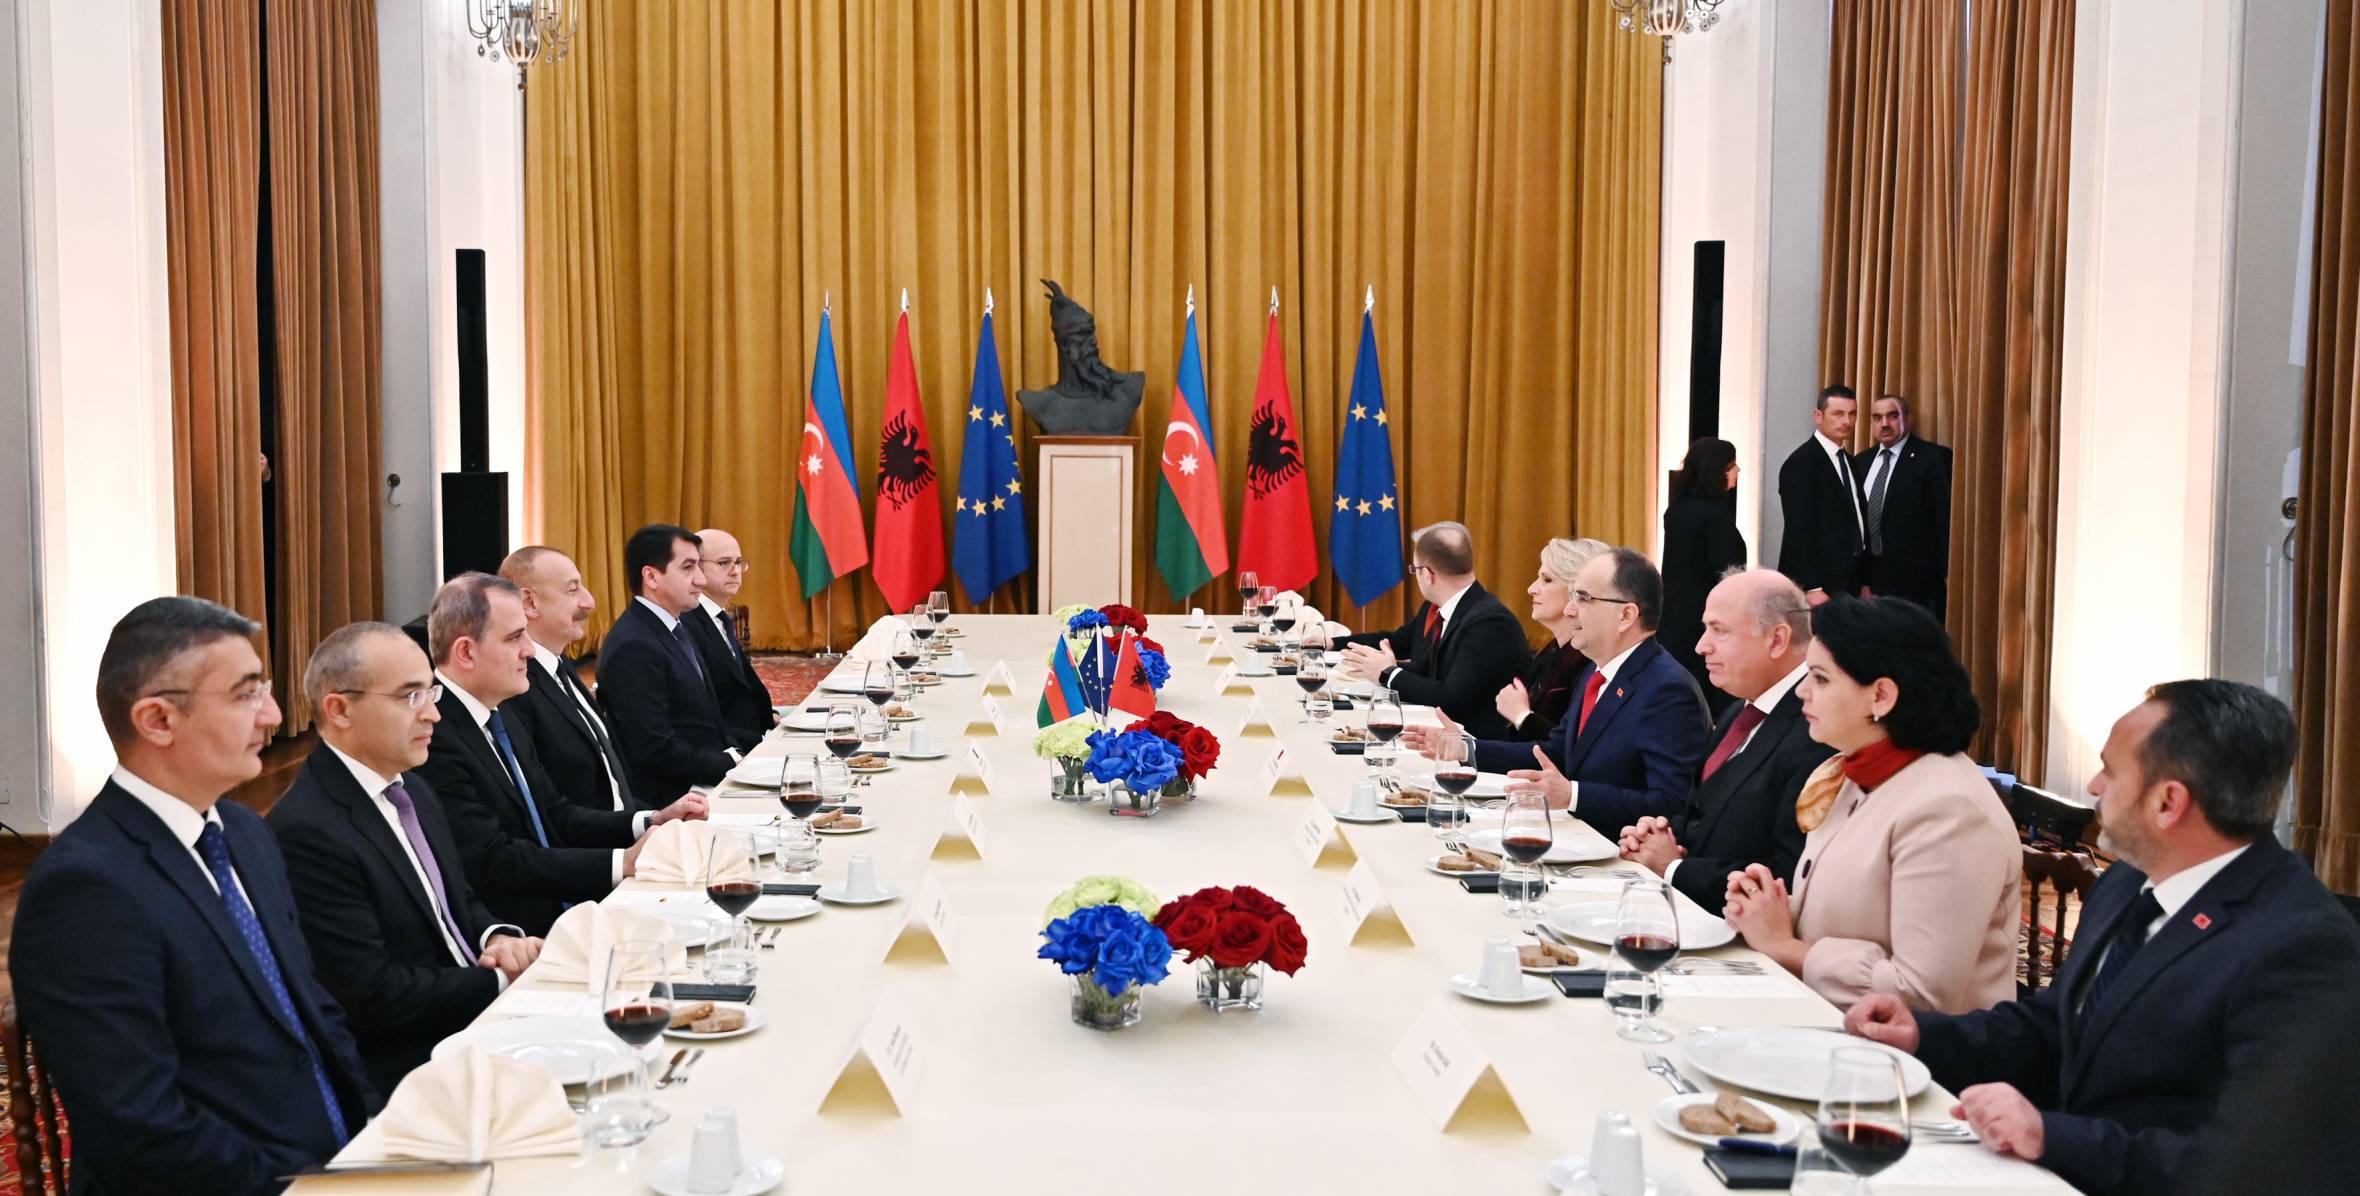 Ilham Aliyev, President of Albania Bajram Begaj held expanded meeting during official lunch